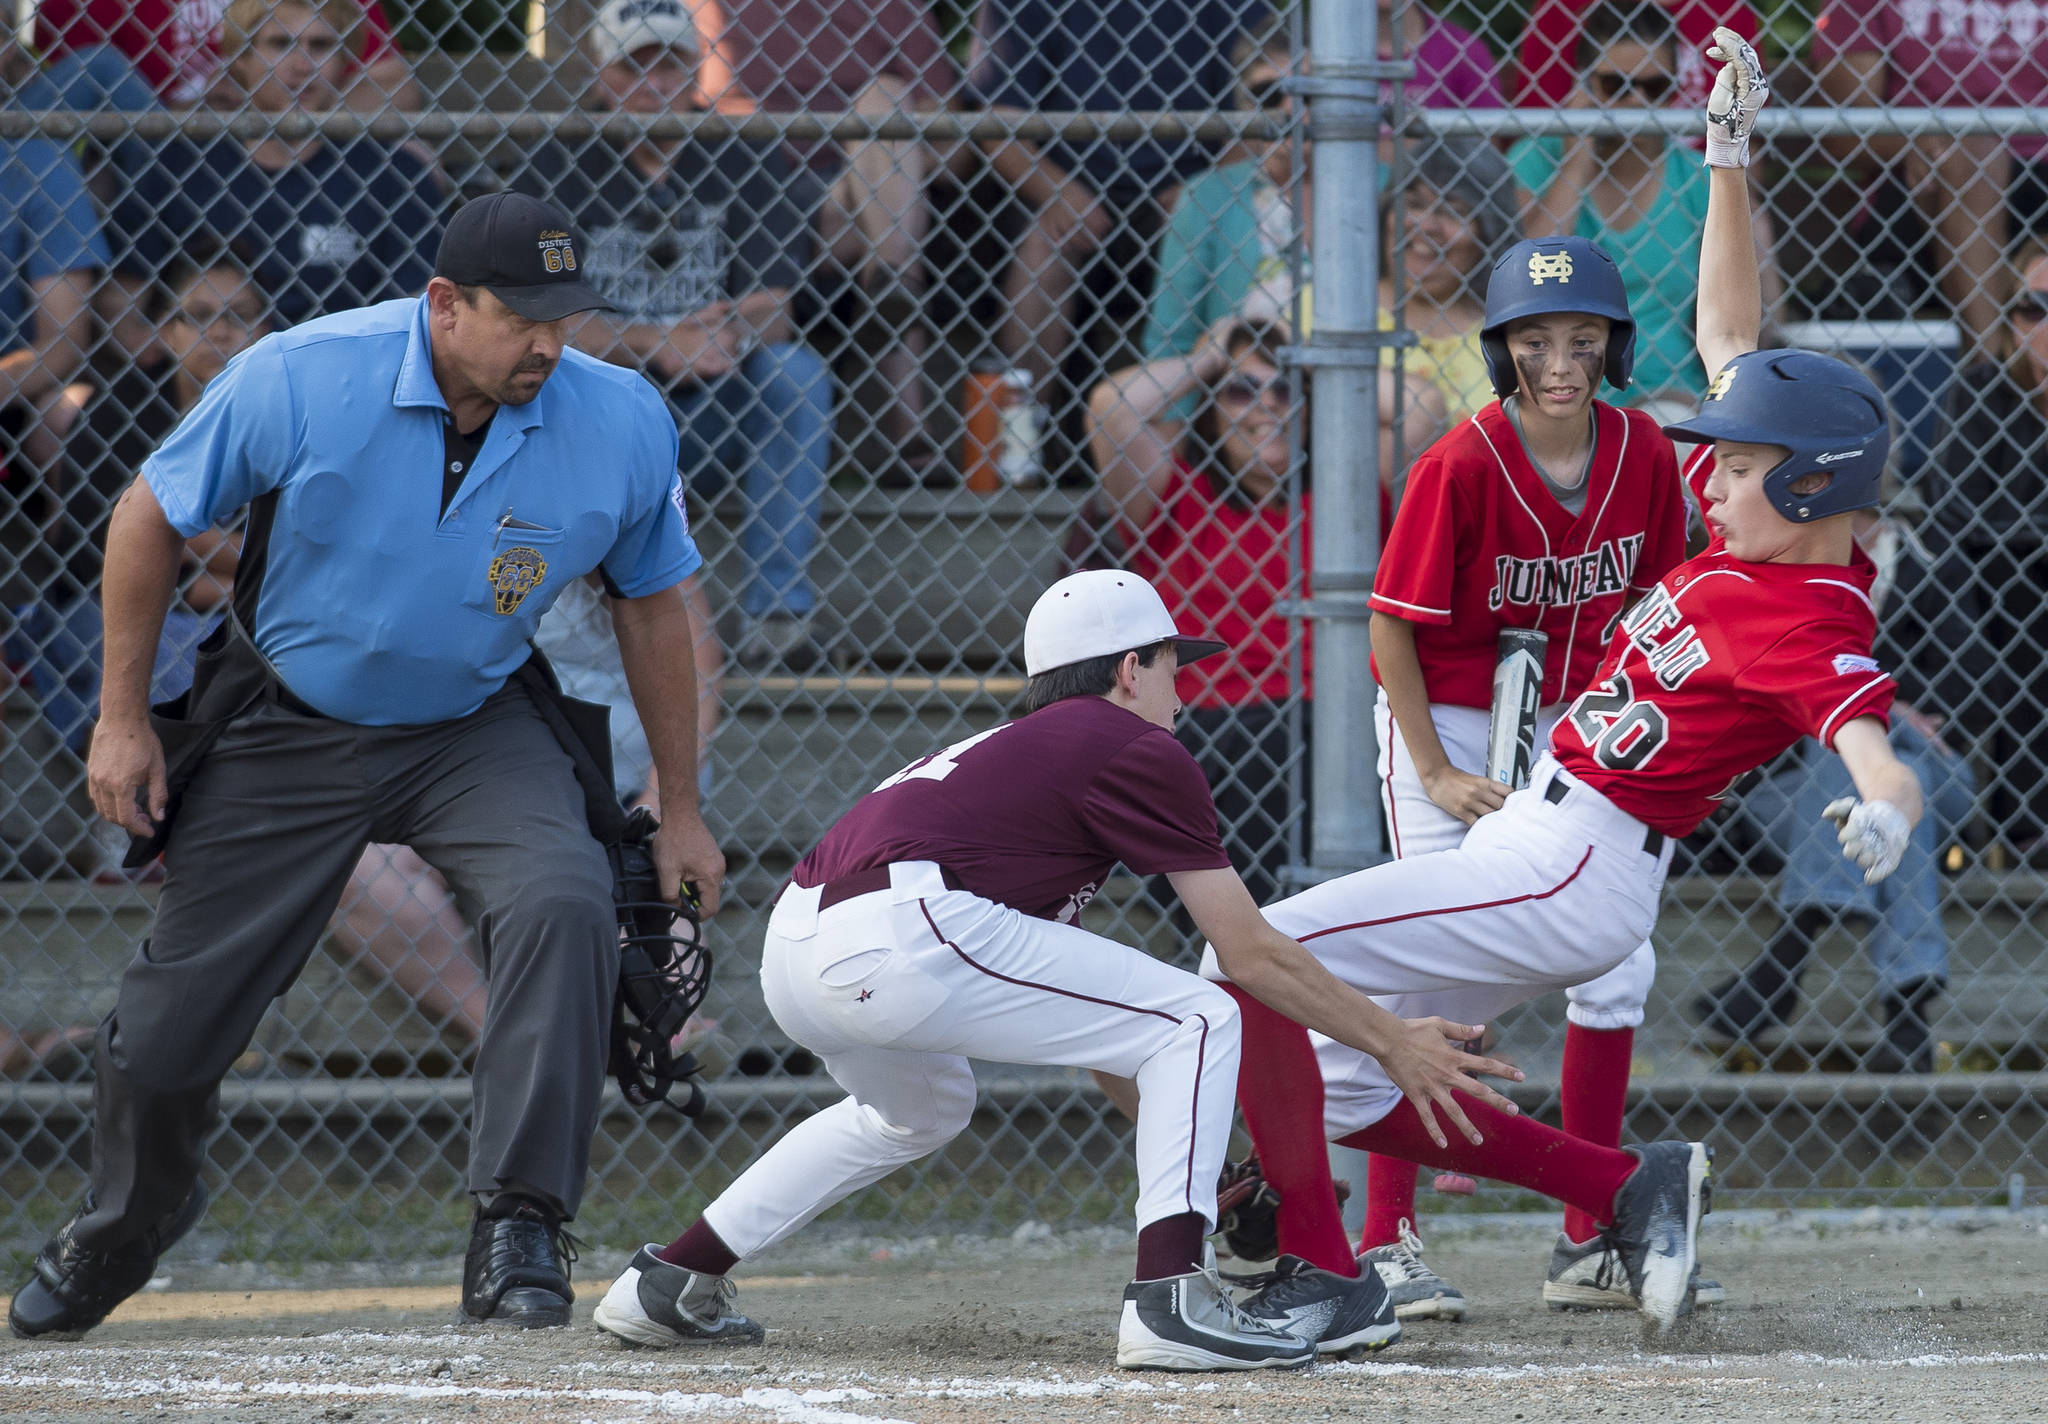 Gastineau Channel’s Kaleb Campbell is caught trying to steal home by Ketchikan’s Colby Hanchey in the fourth inning of the Alaska Major Baseball District 2 Championship Game at Miller Field on Tuesday. (Michael Penn | Juneau Empire)